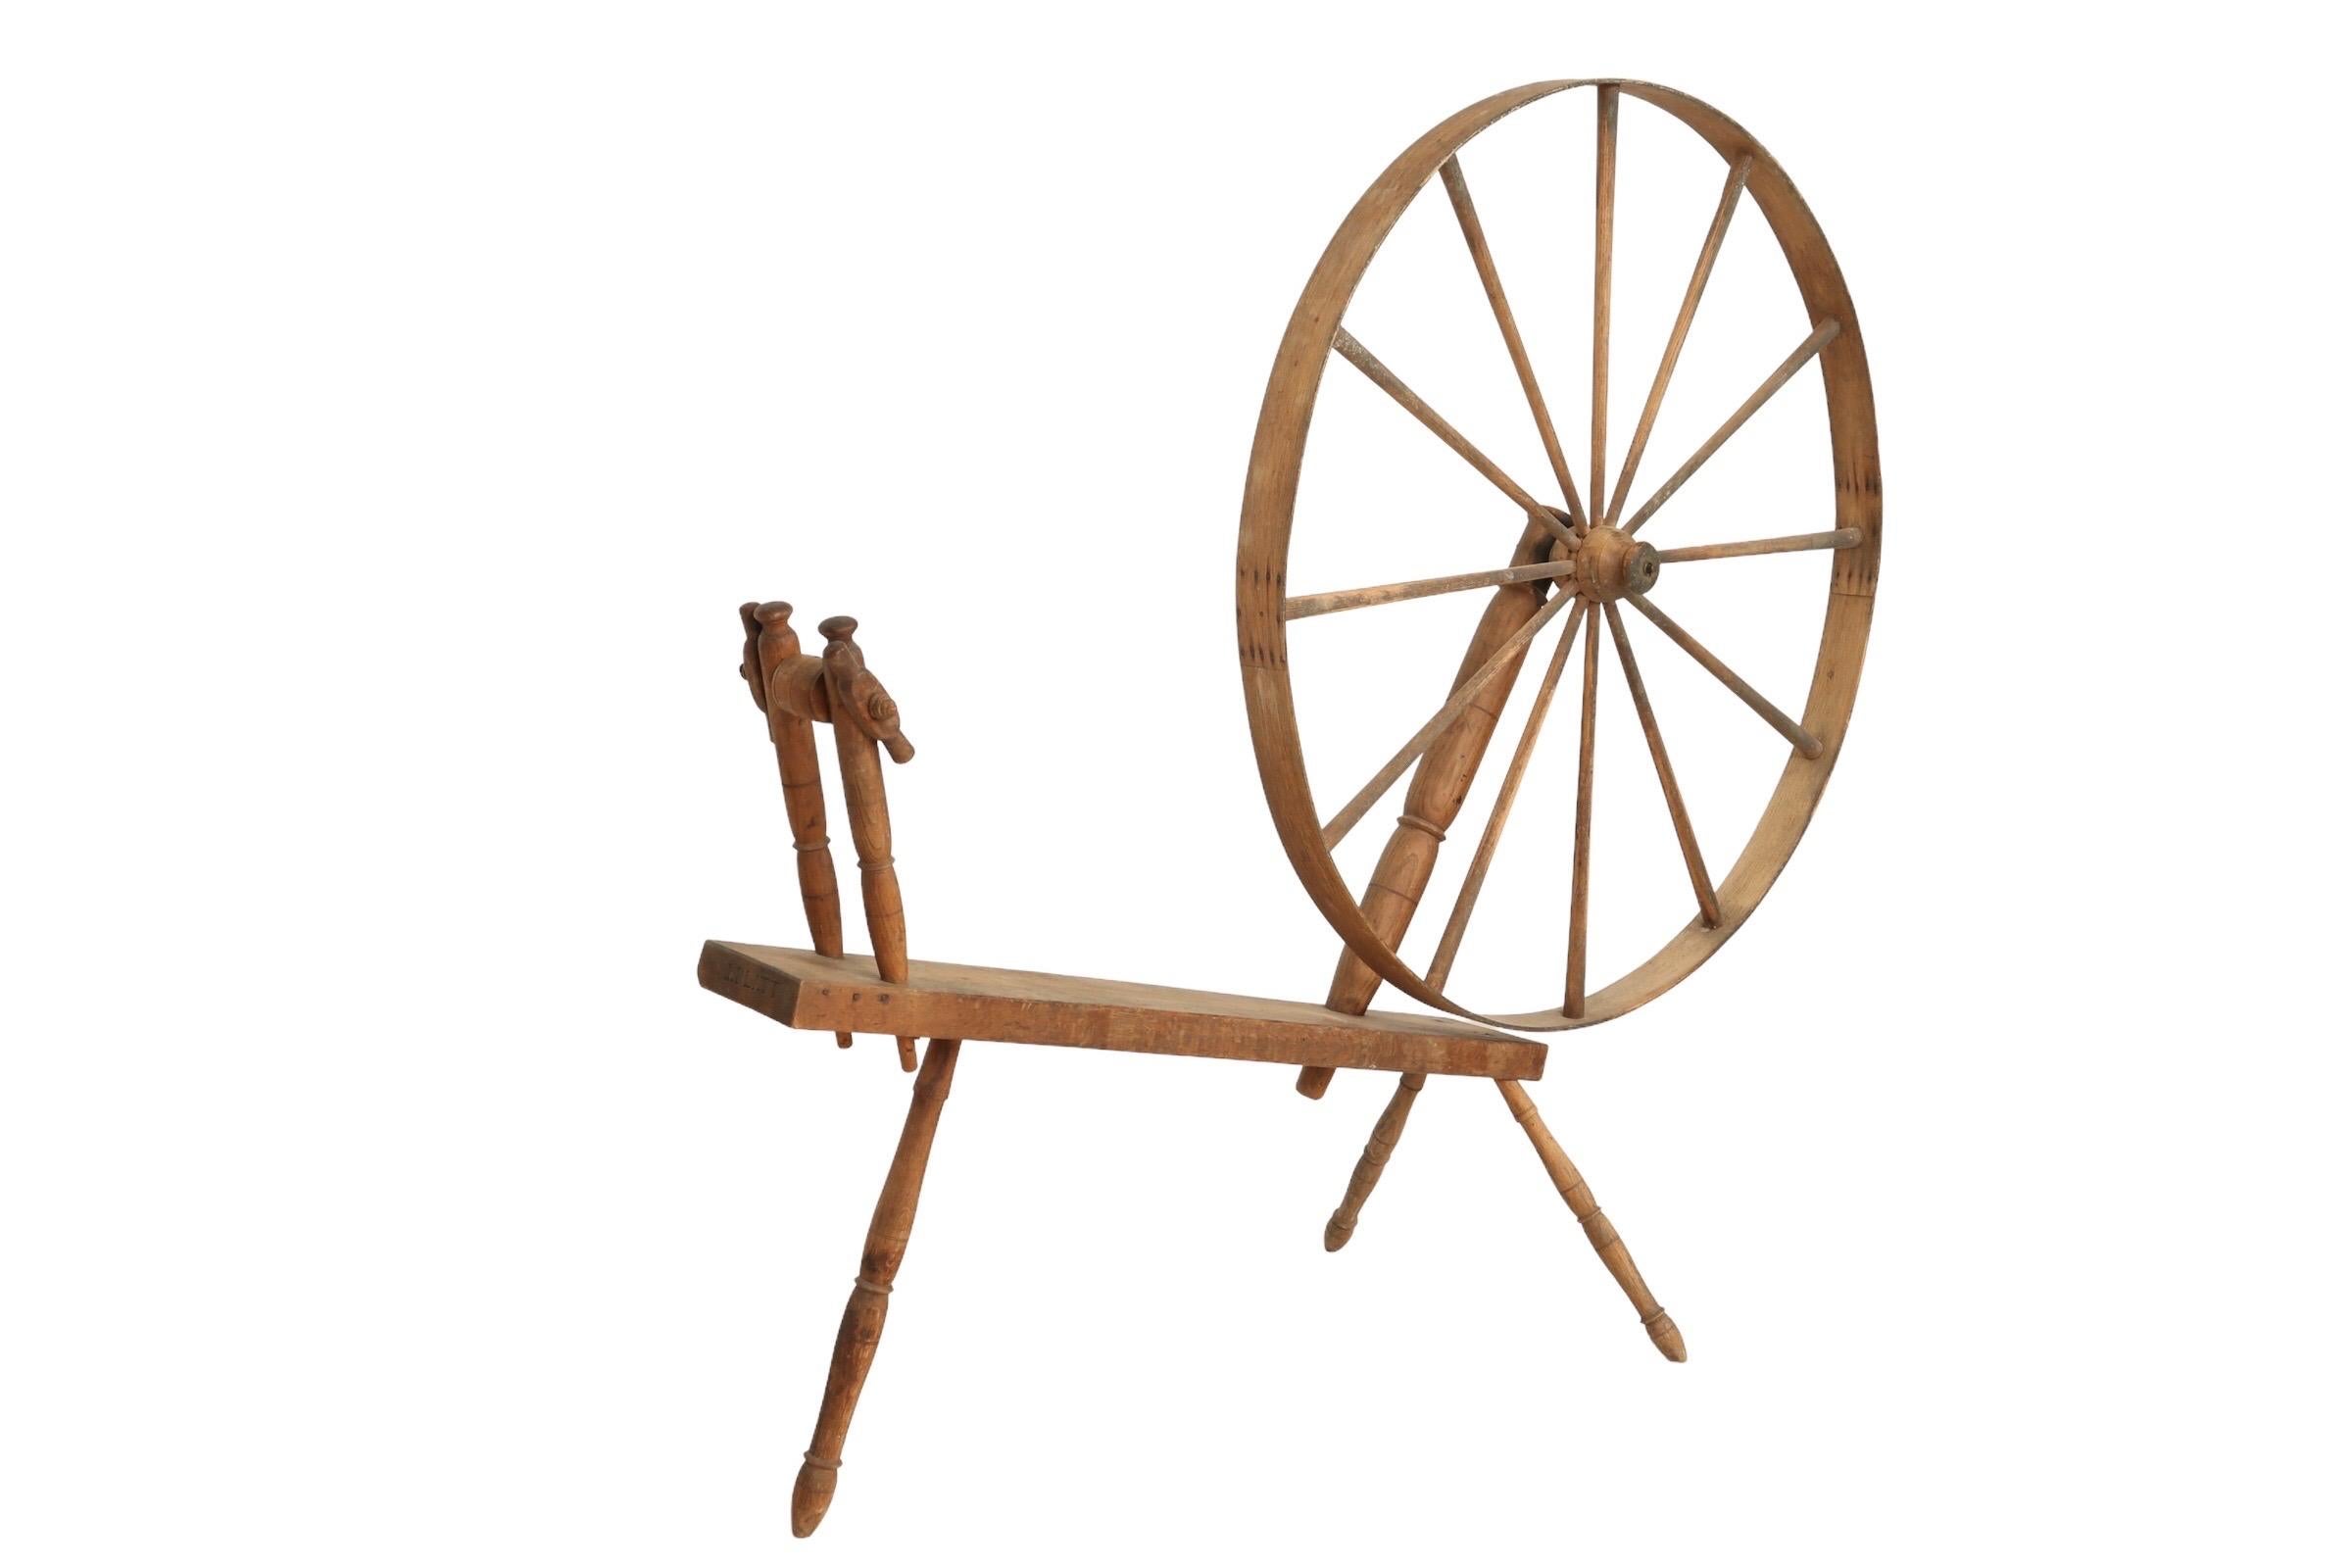 A large wheeled walking spinning wheel designed to be operated while standing, also known as a Great Wheel. Made by J.Platt, as marked on the end of the oak base or table, who made wheels in the late 1700’s and early 1800’s. Three turned pointed